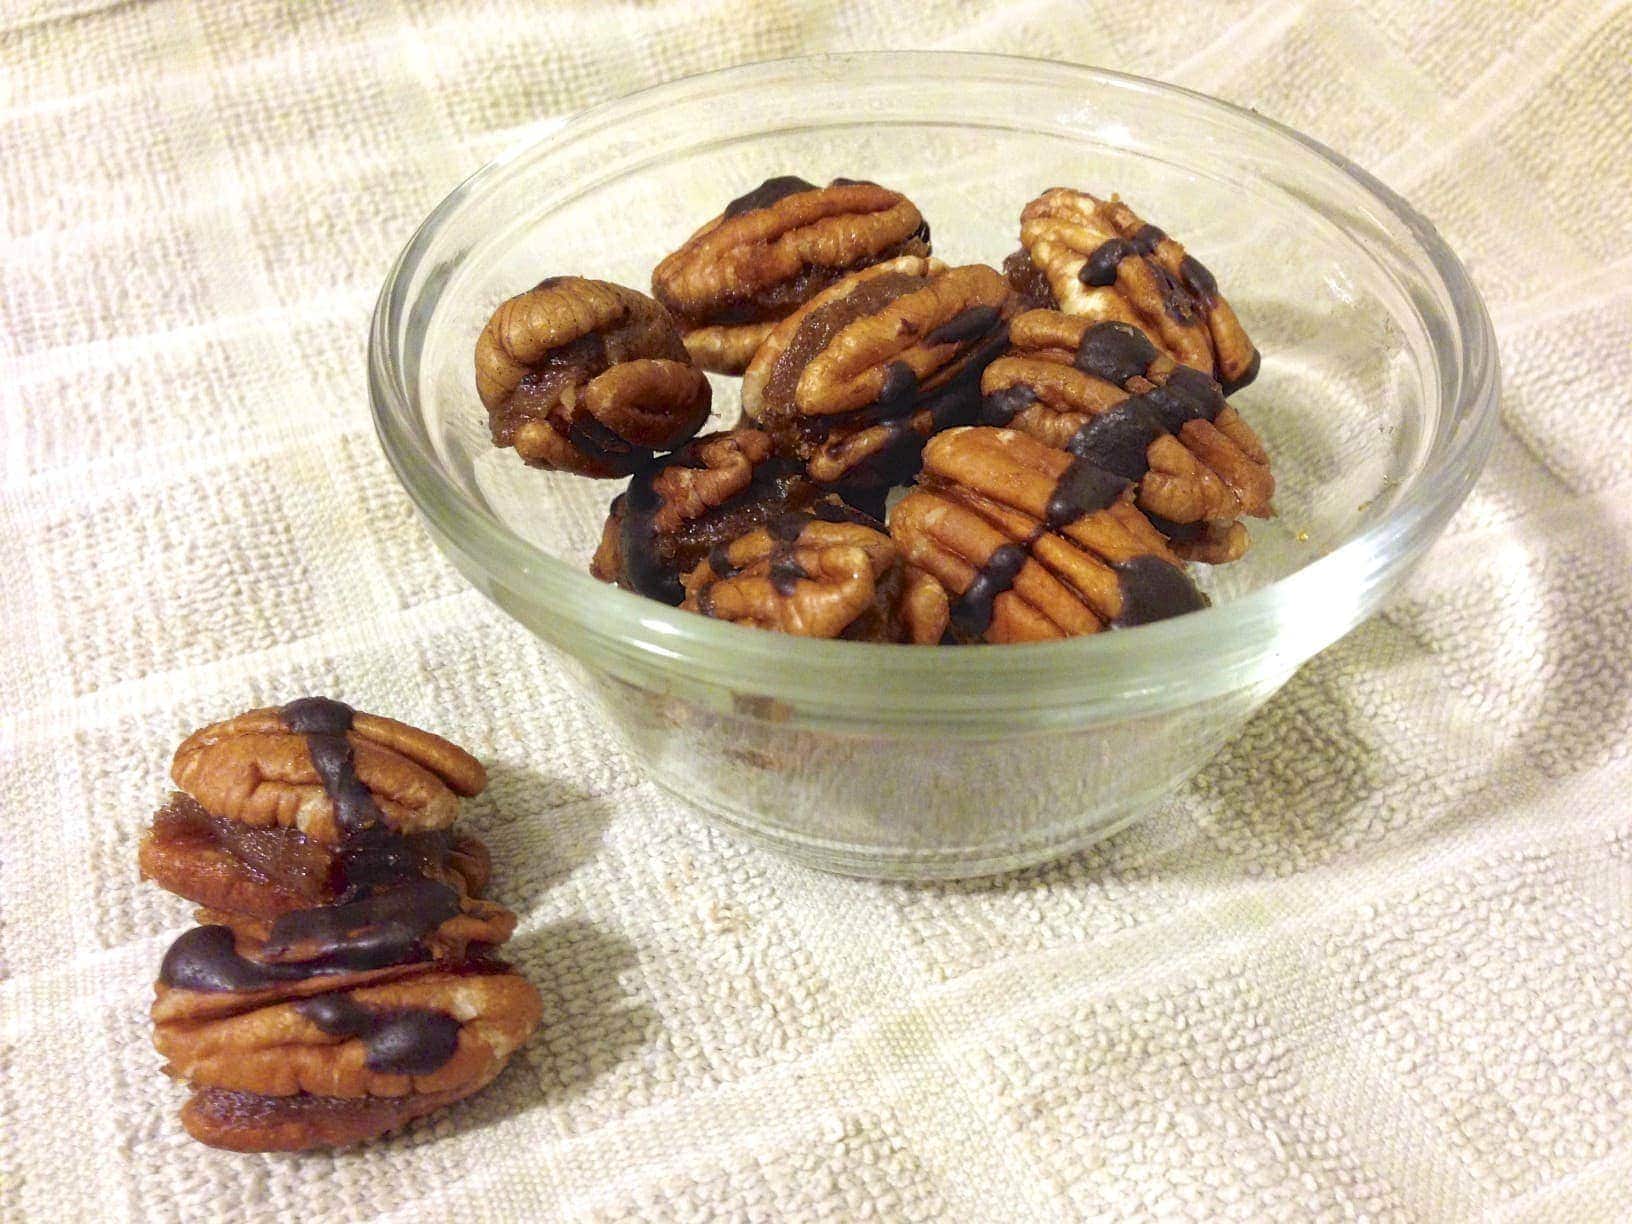 small glass dish with chocolate drizzled caramel filled pecans and a few loose pecans on the left side of the dish